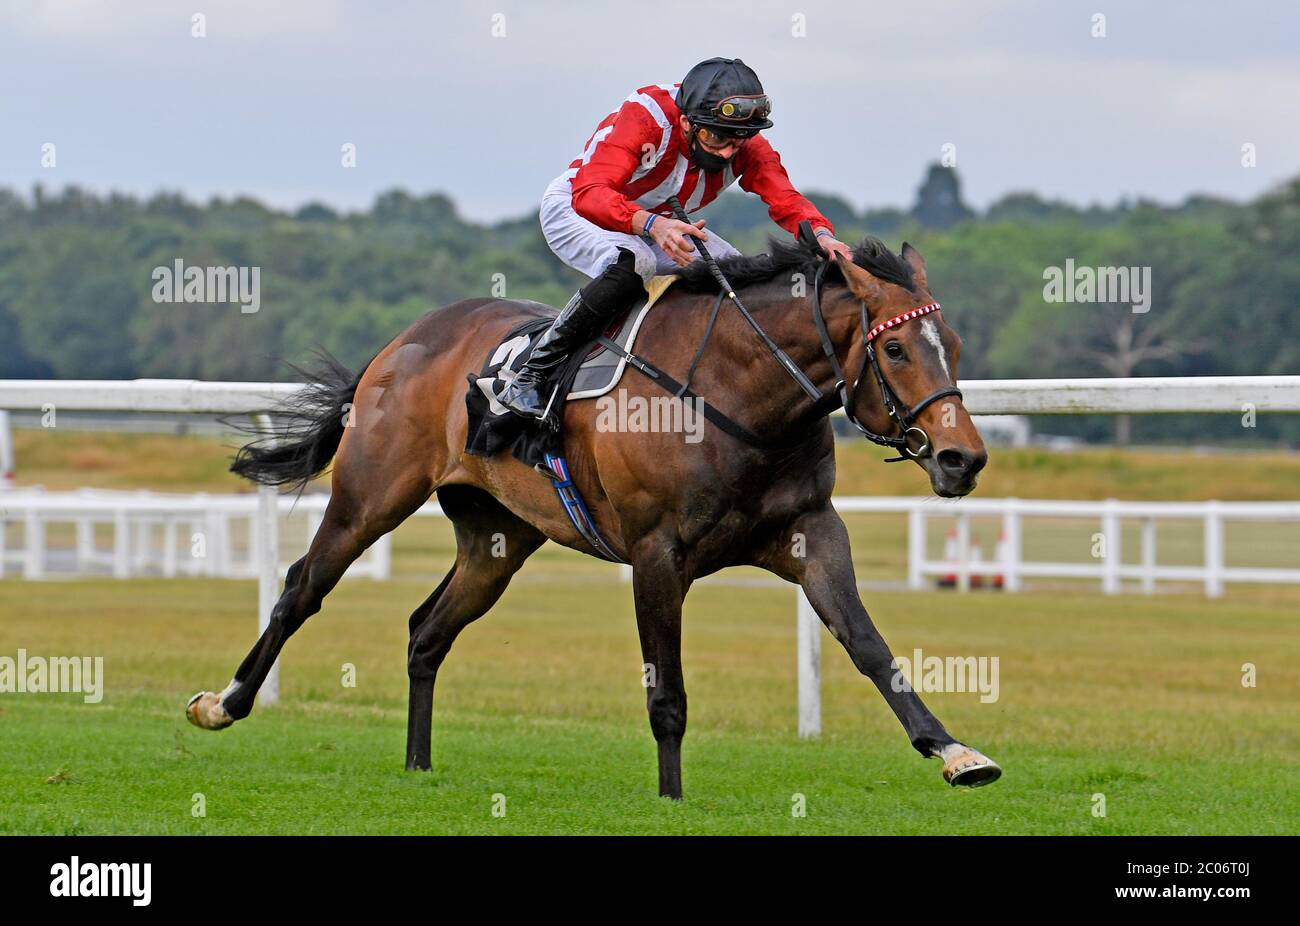 Involved ridden by James Doyle wins the MansionBet’s Beaten by a Head Handicap at Newbury Racecourse. Stock Photo